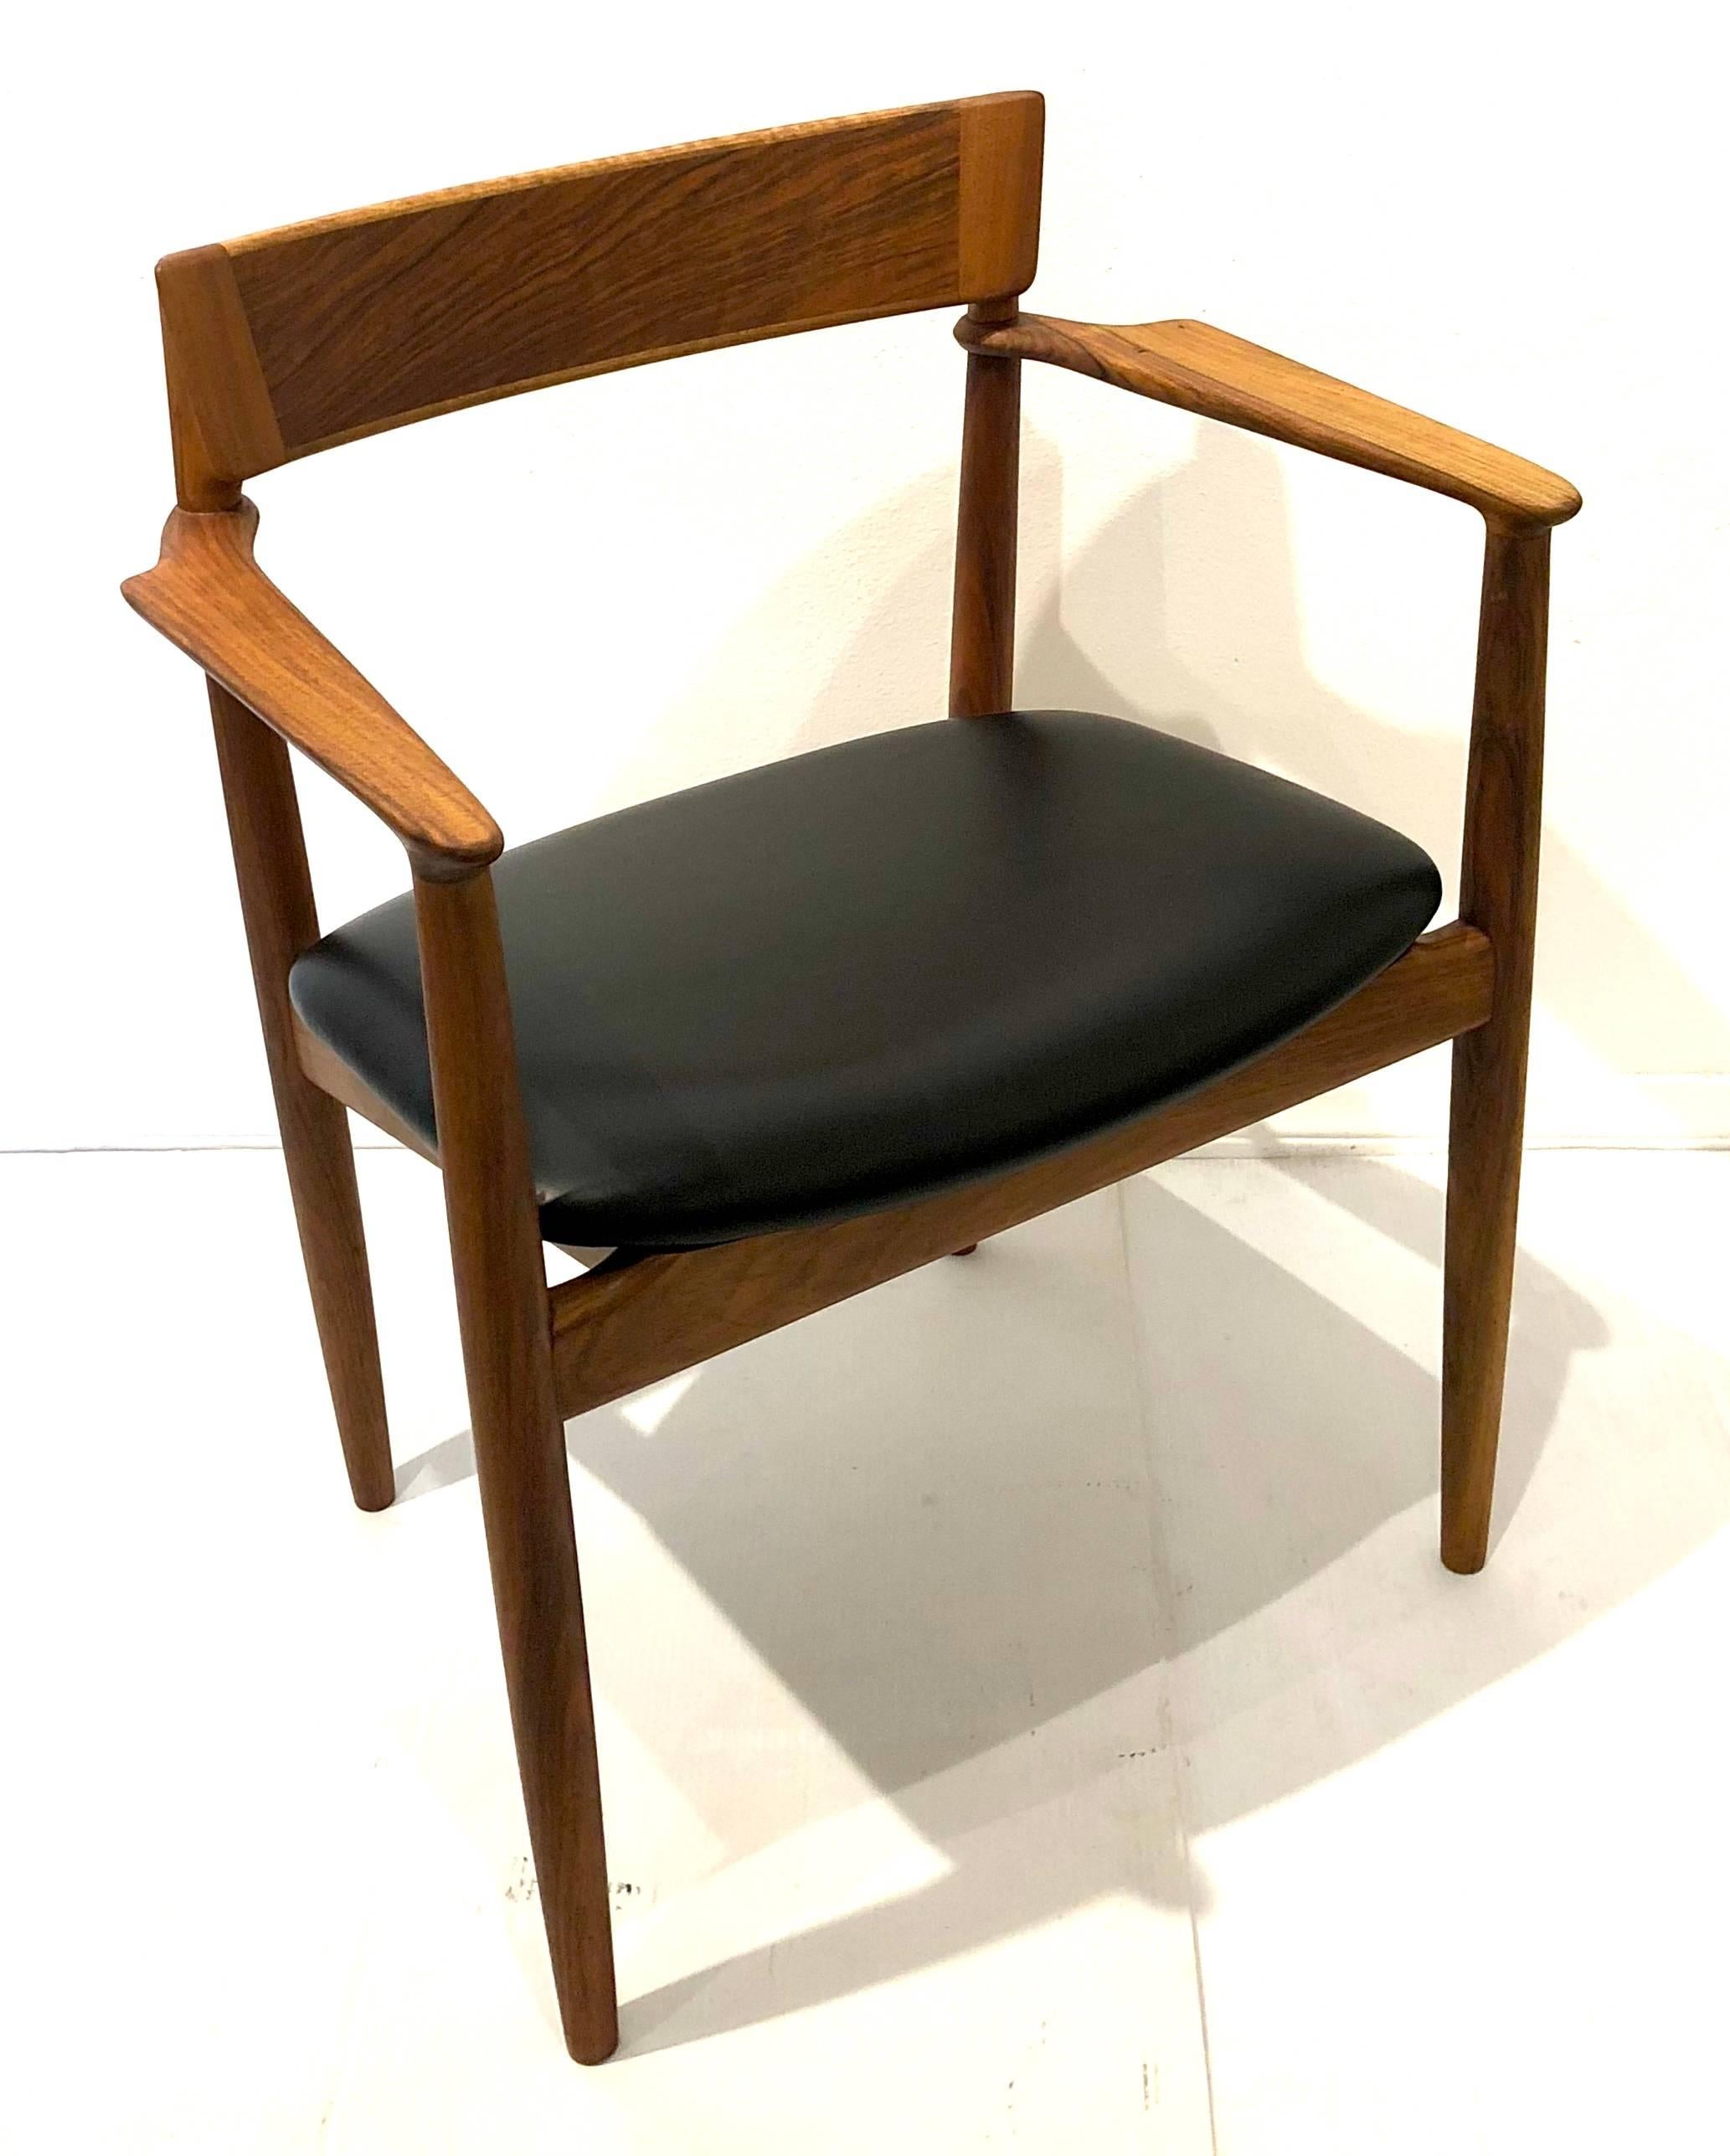 A beautiful sculpted arms rosewood and light walnut rare armchair, freshly refinished and new black leather upholstered seat. Excellent condition solid and sturdy.